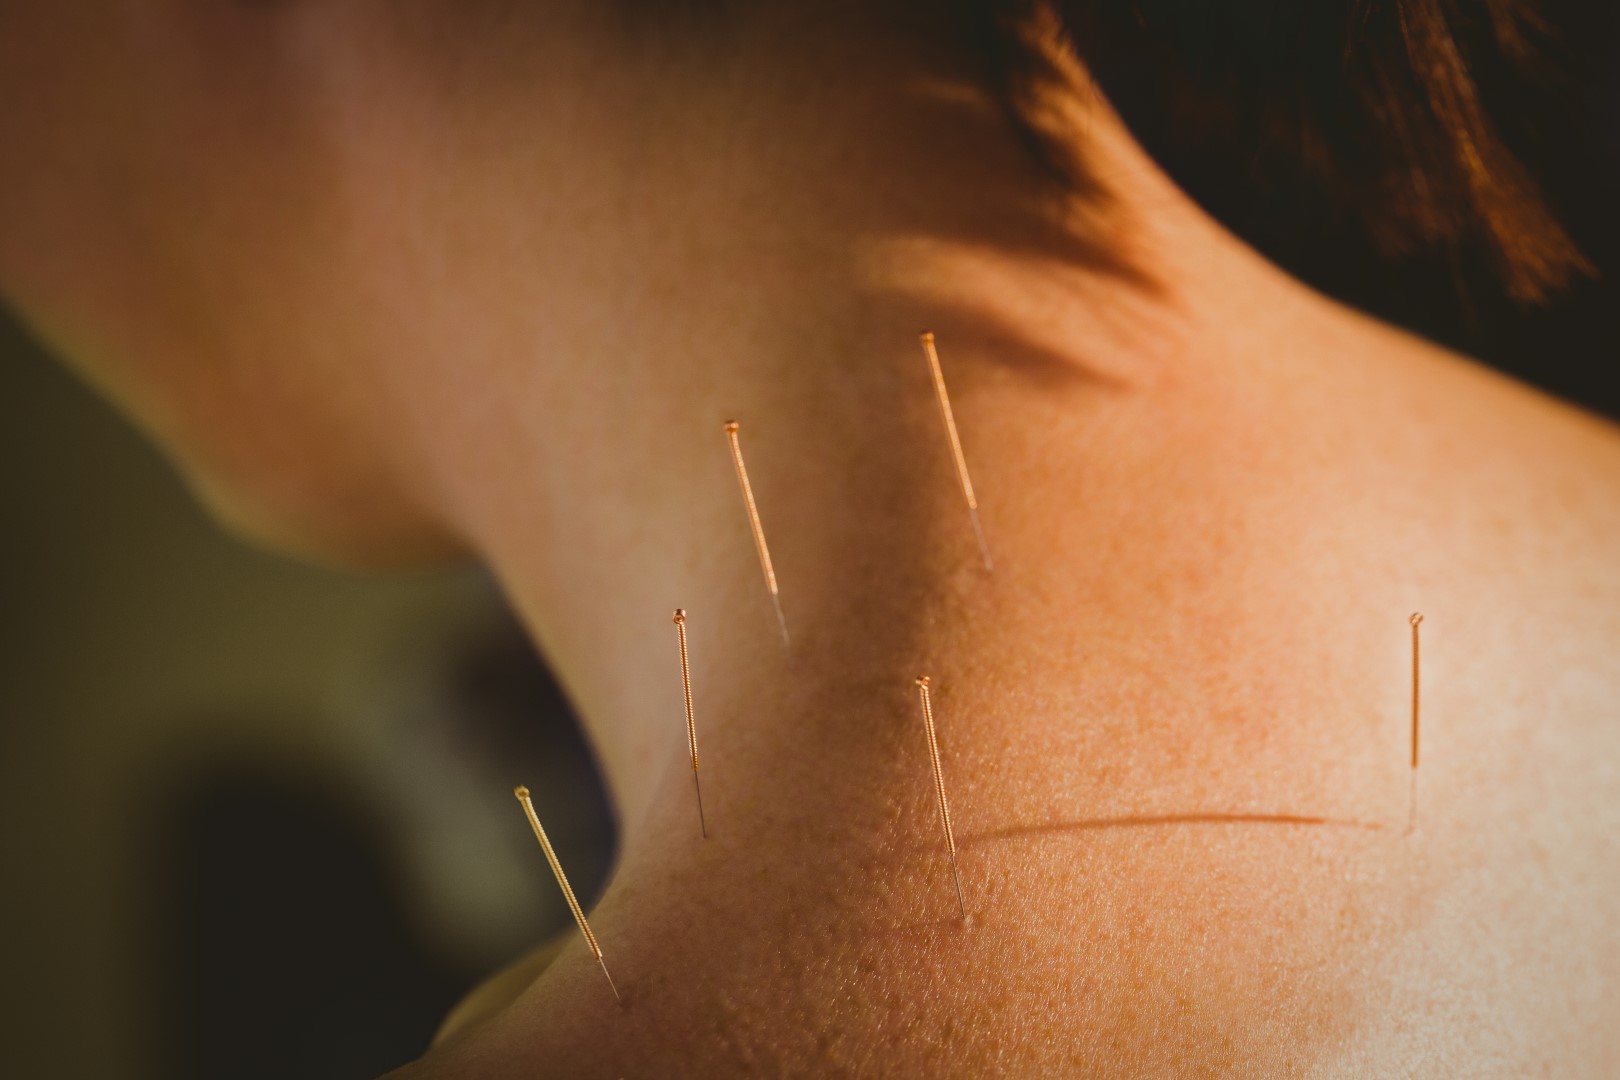 Acupuncture for chronic pain: inserting needles in acupuncture points to relieve pain.